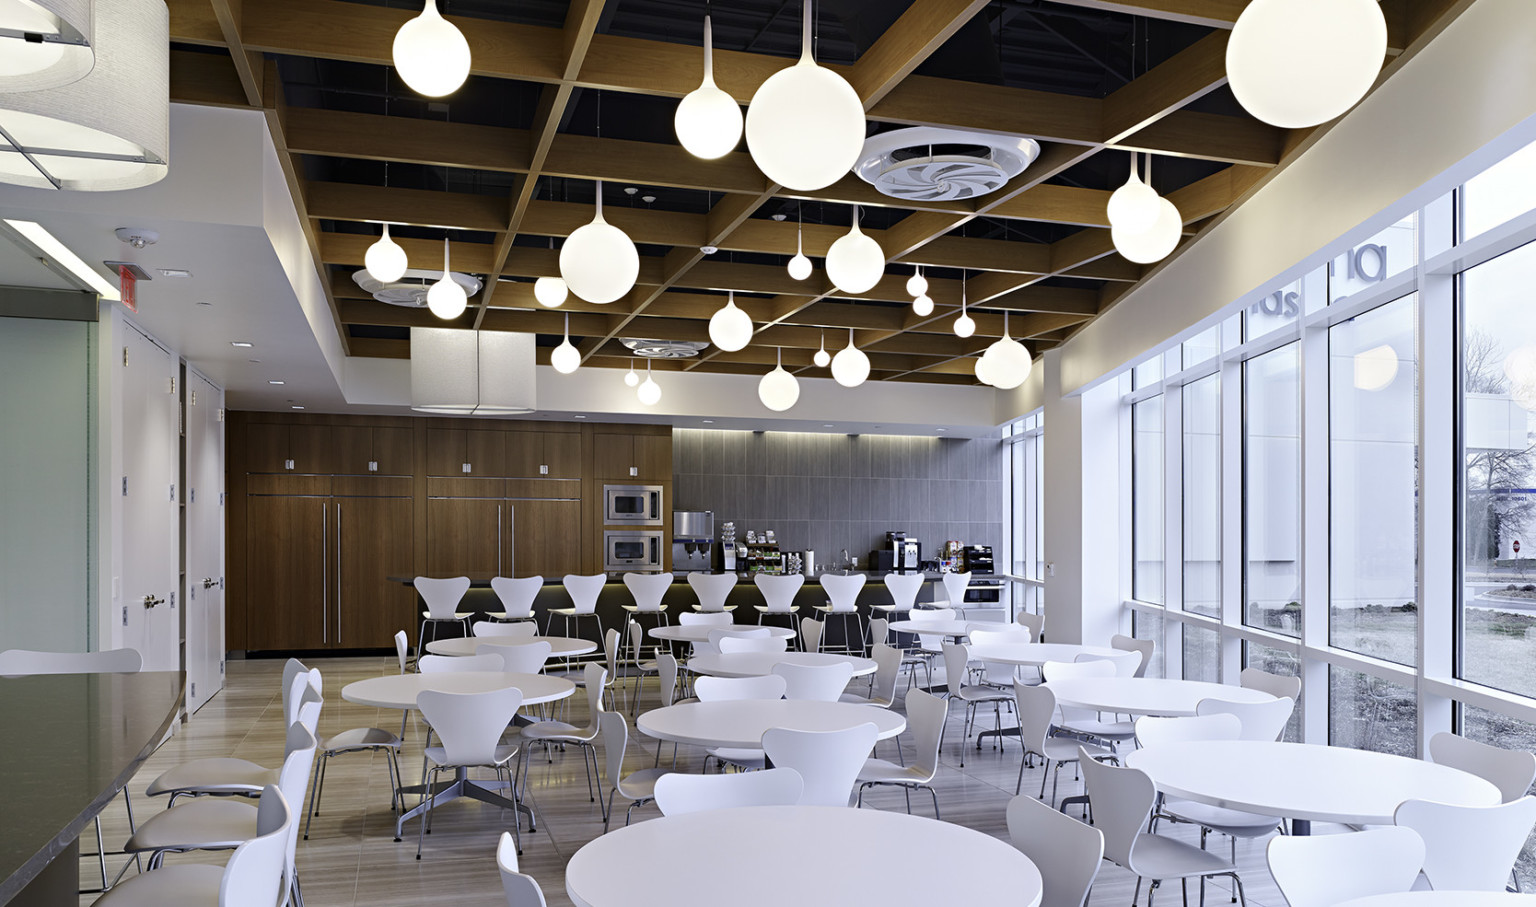 dining space with white tables and chairs, wood panel ceiling, and white round bulb pendant lighting